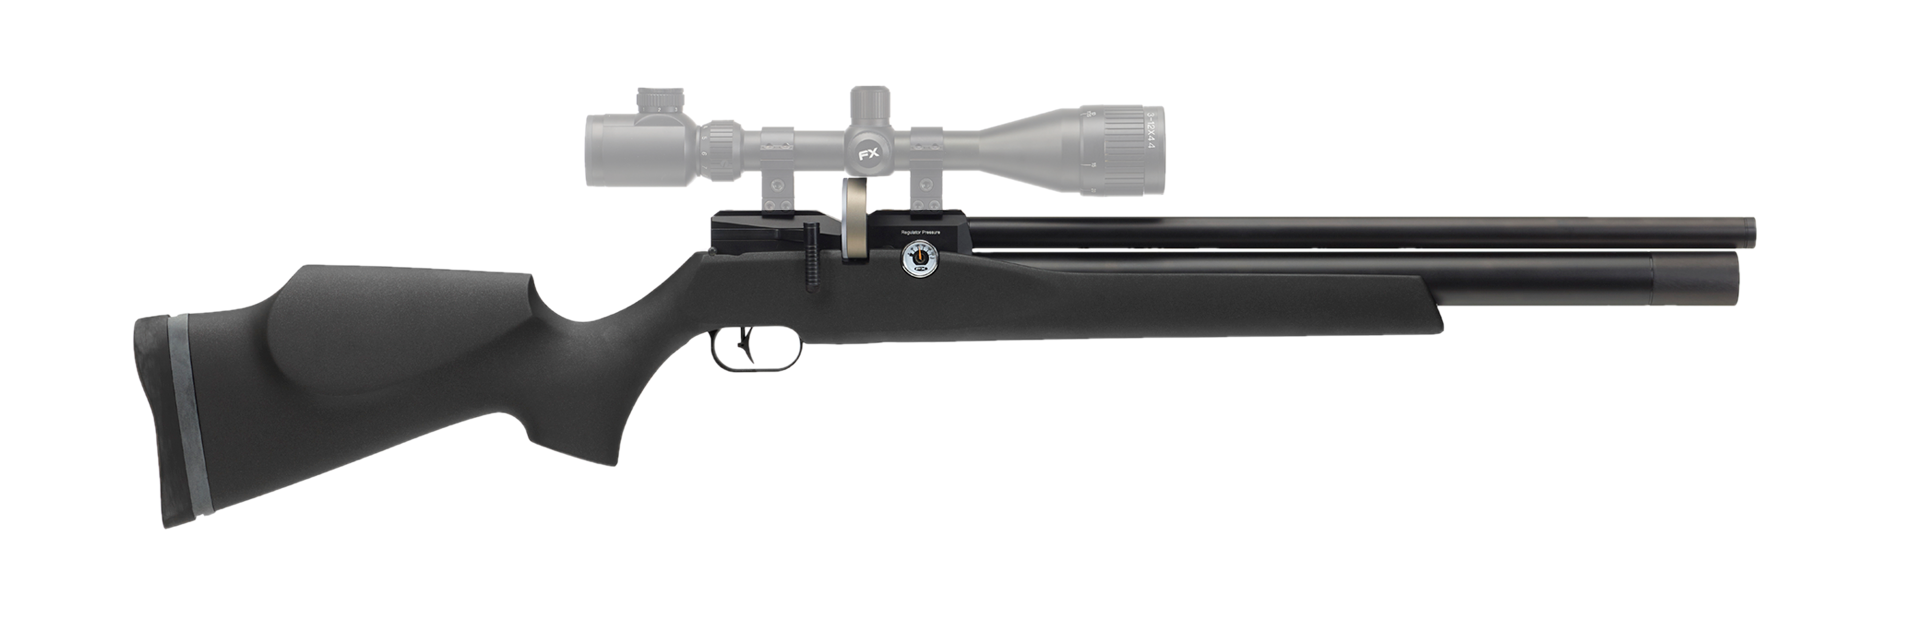 Fx Dreamline Classic Synthetic Airguns Europe 4386